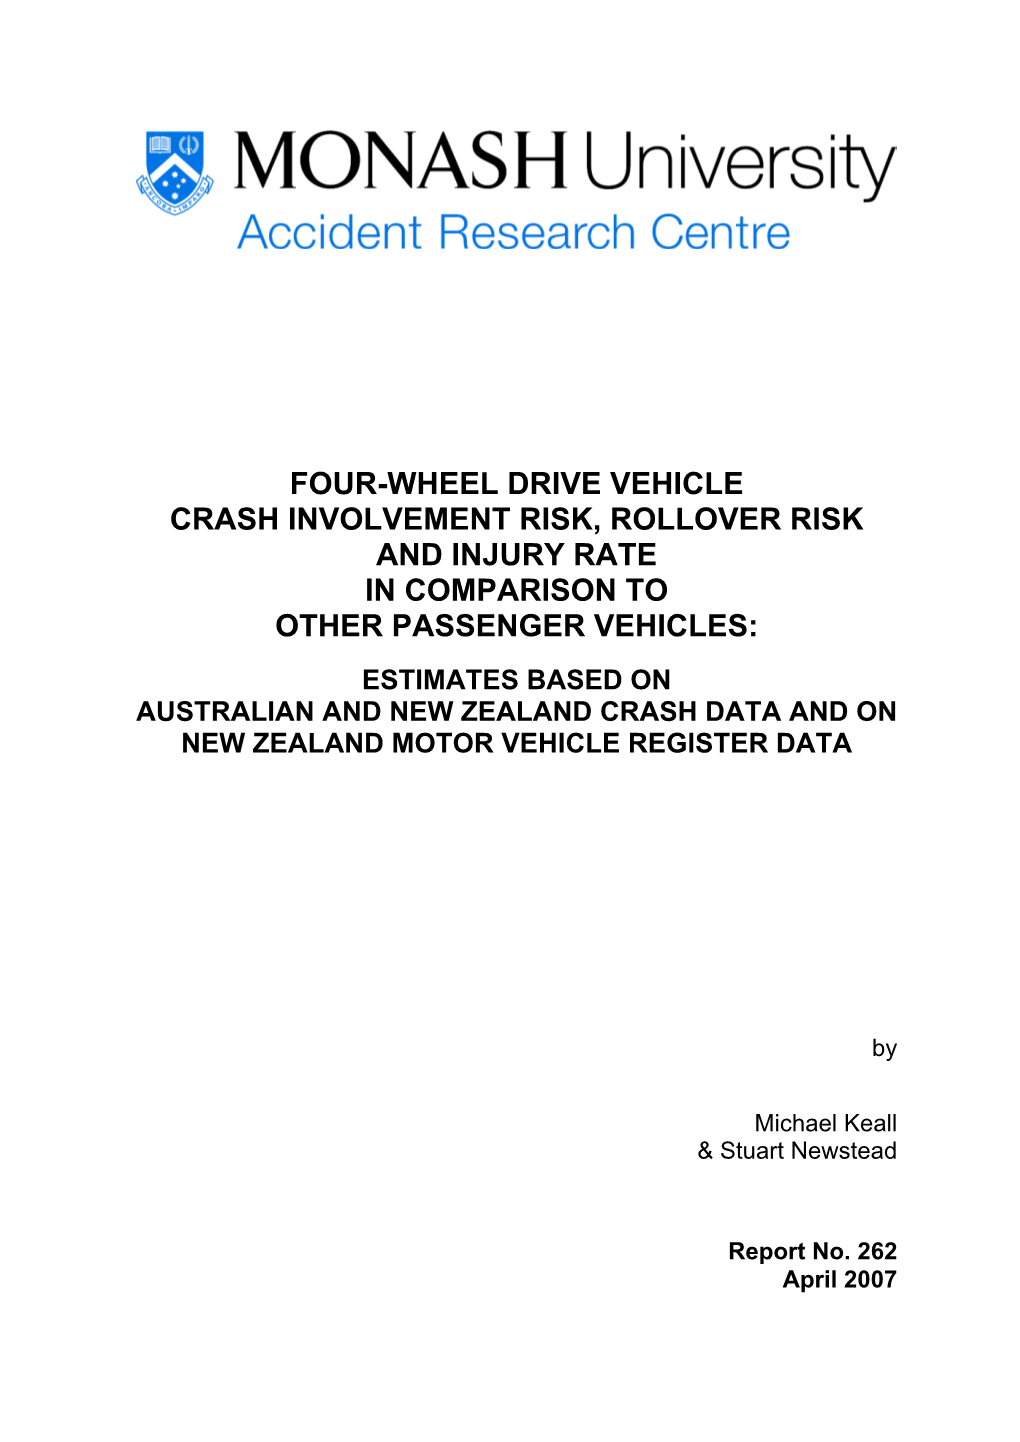 Four-Wheel Drive Vehicle Crash Involvement Risk, Rollover Risk and Injury Rate in Comparison to Other Passenger Vehicles